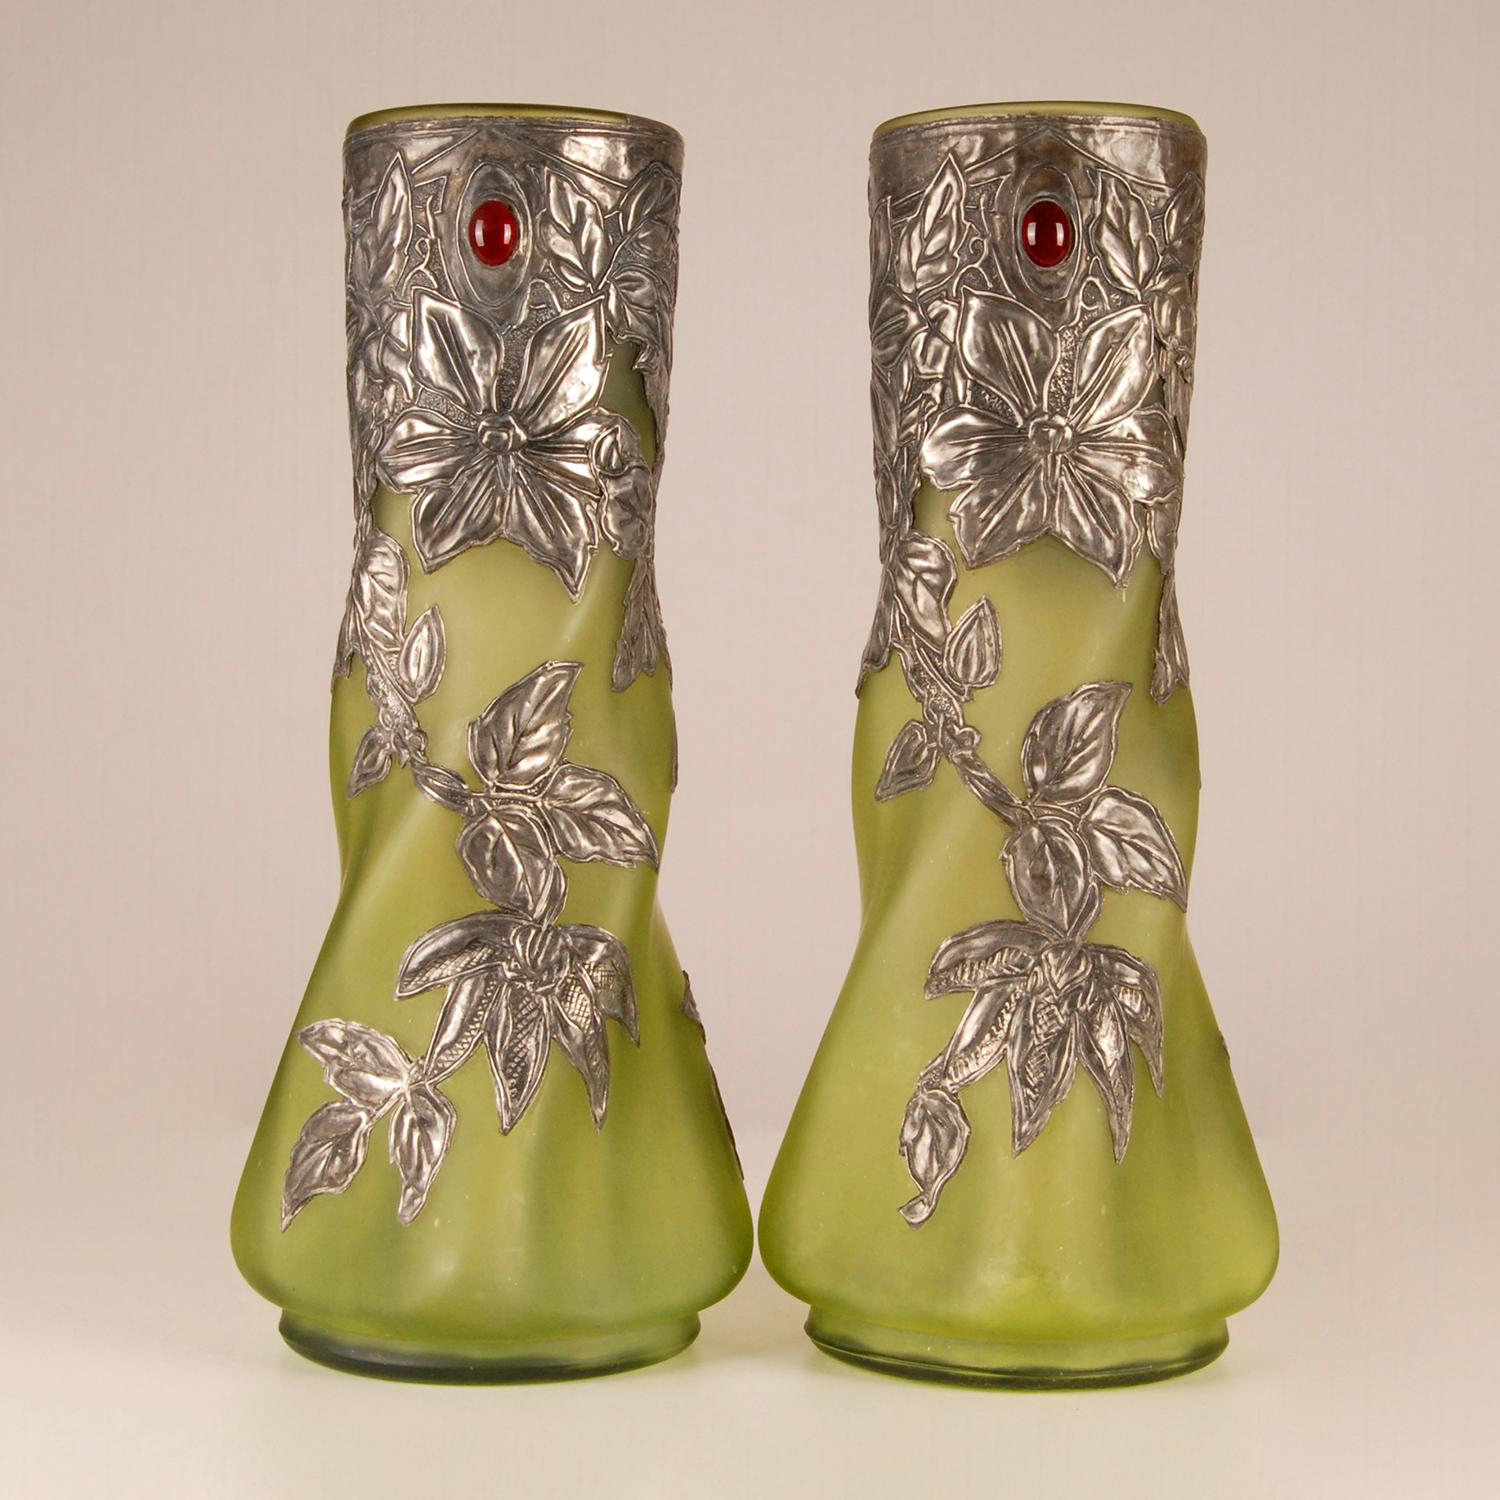 A pair French art glass pate de verre vases with pewter and glass paste stones
The vases are made of green pate de verre mounted in floral shaped silver pewter and jewelled on front and back with cabochon cut glass paste stones
Design: In the